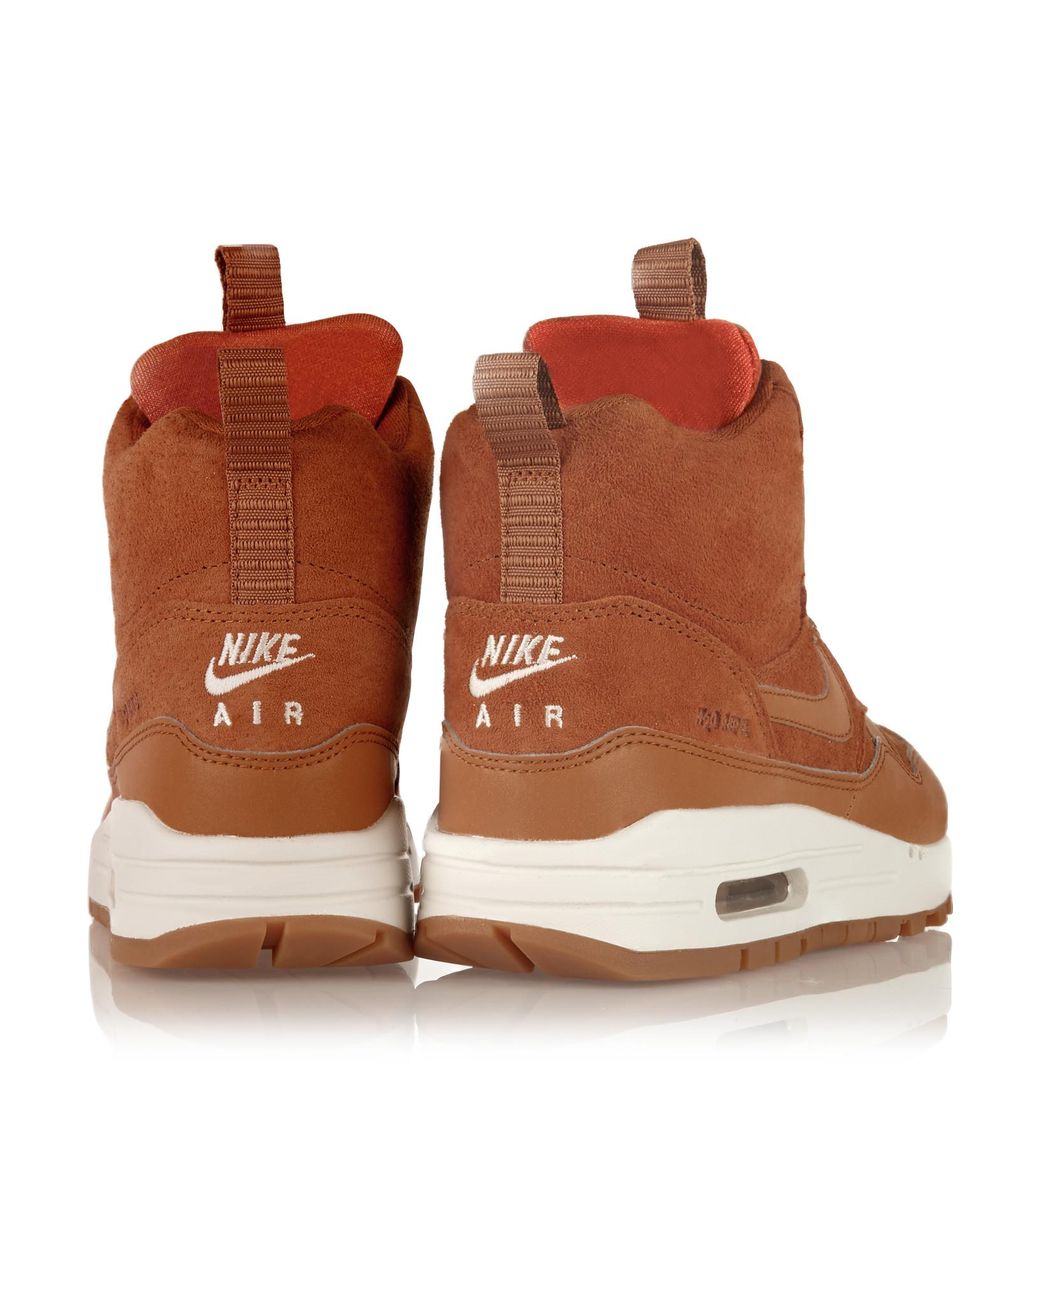 Nike - Air Max 1 Suede And Leather High-top Sneakers - Tan in Brown | Lyst